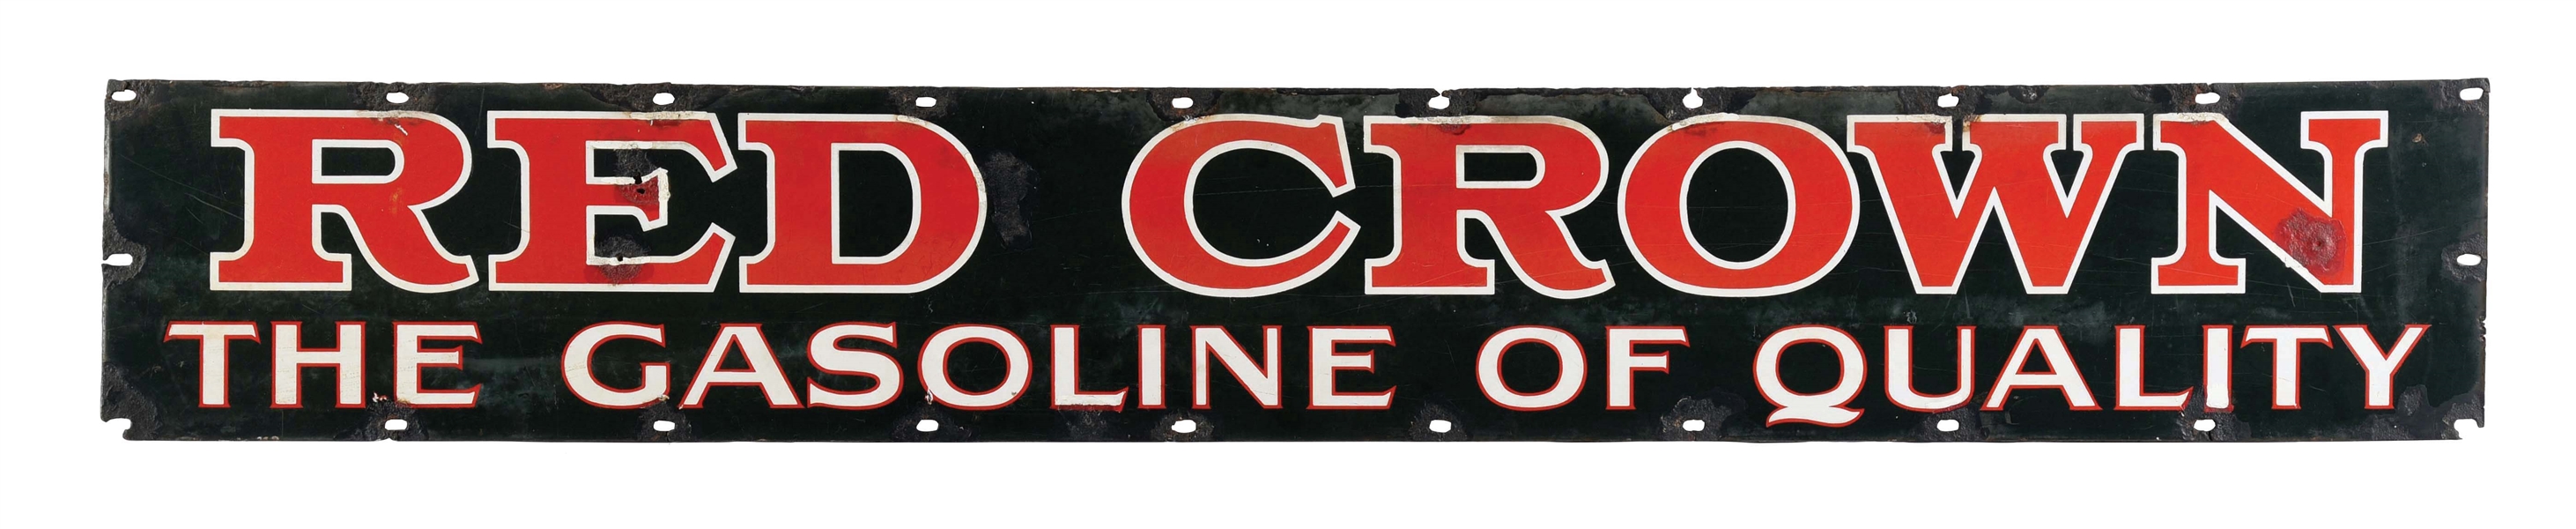 RED CROWN THE GASOLINE OF QUALITY PORCELAIN STRIP SIGN. 